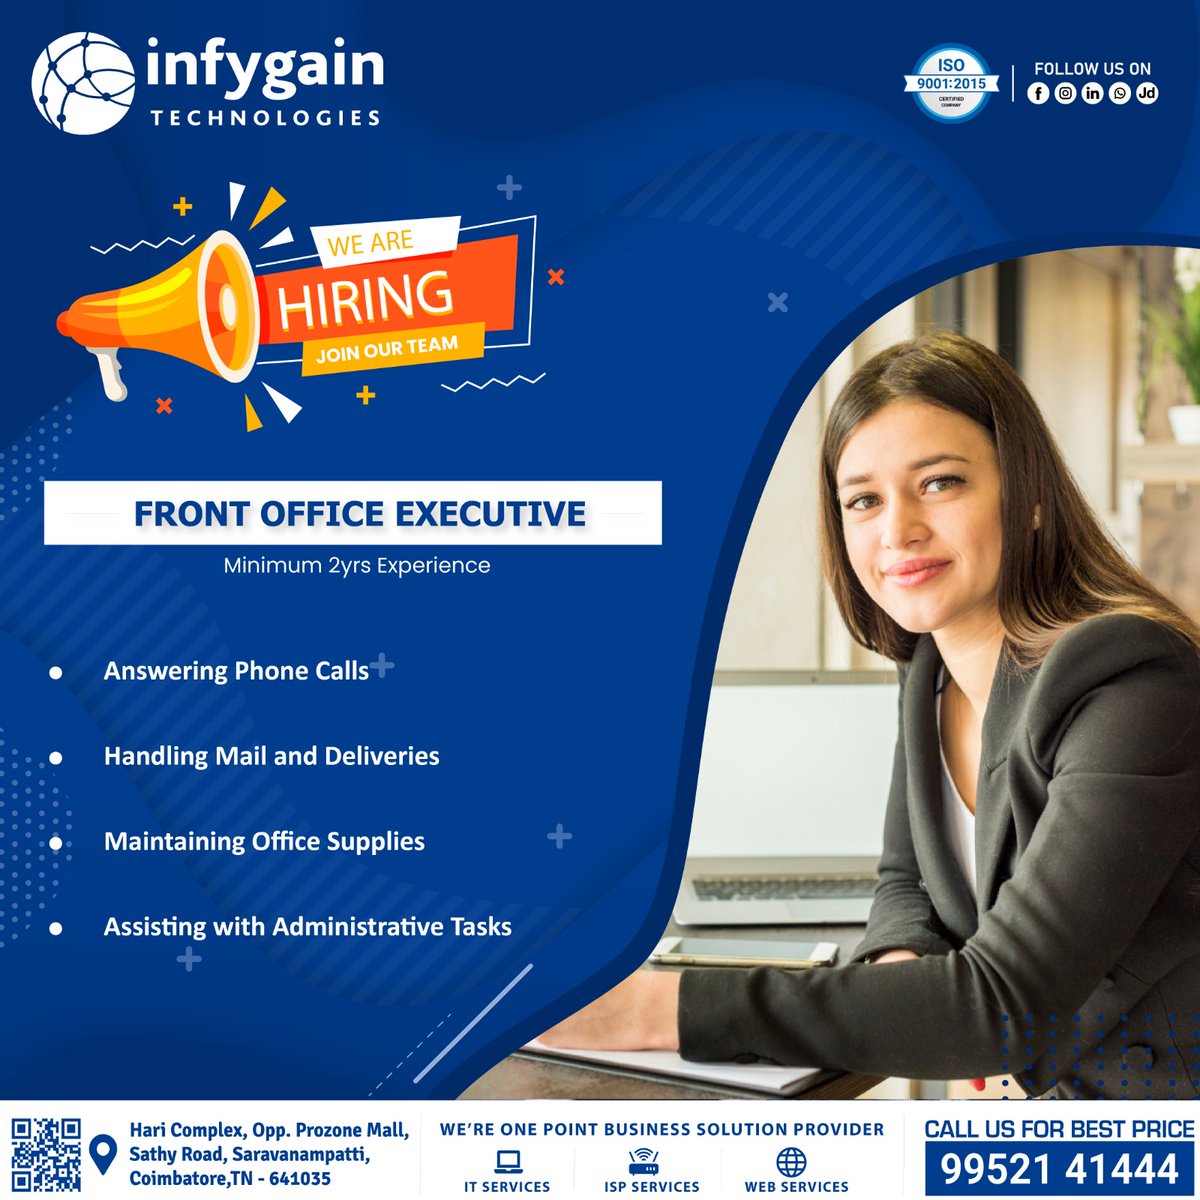 🌟 Join our team as a Front Office Executive! 🌟

✅ Answer phone calls ✅ Handle mail and deliveries ✅ Manage office supplies ✅ Assist with administrative tasks
Ready for the challenge? Apply now at [career@infygain.com] or 📞9952141444.
#Hiring #FrontOffice #JobOpportunity